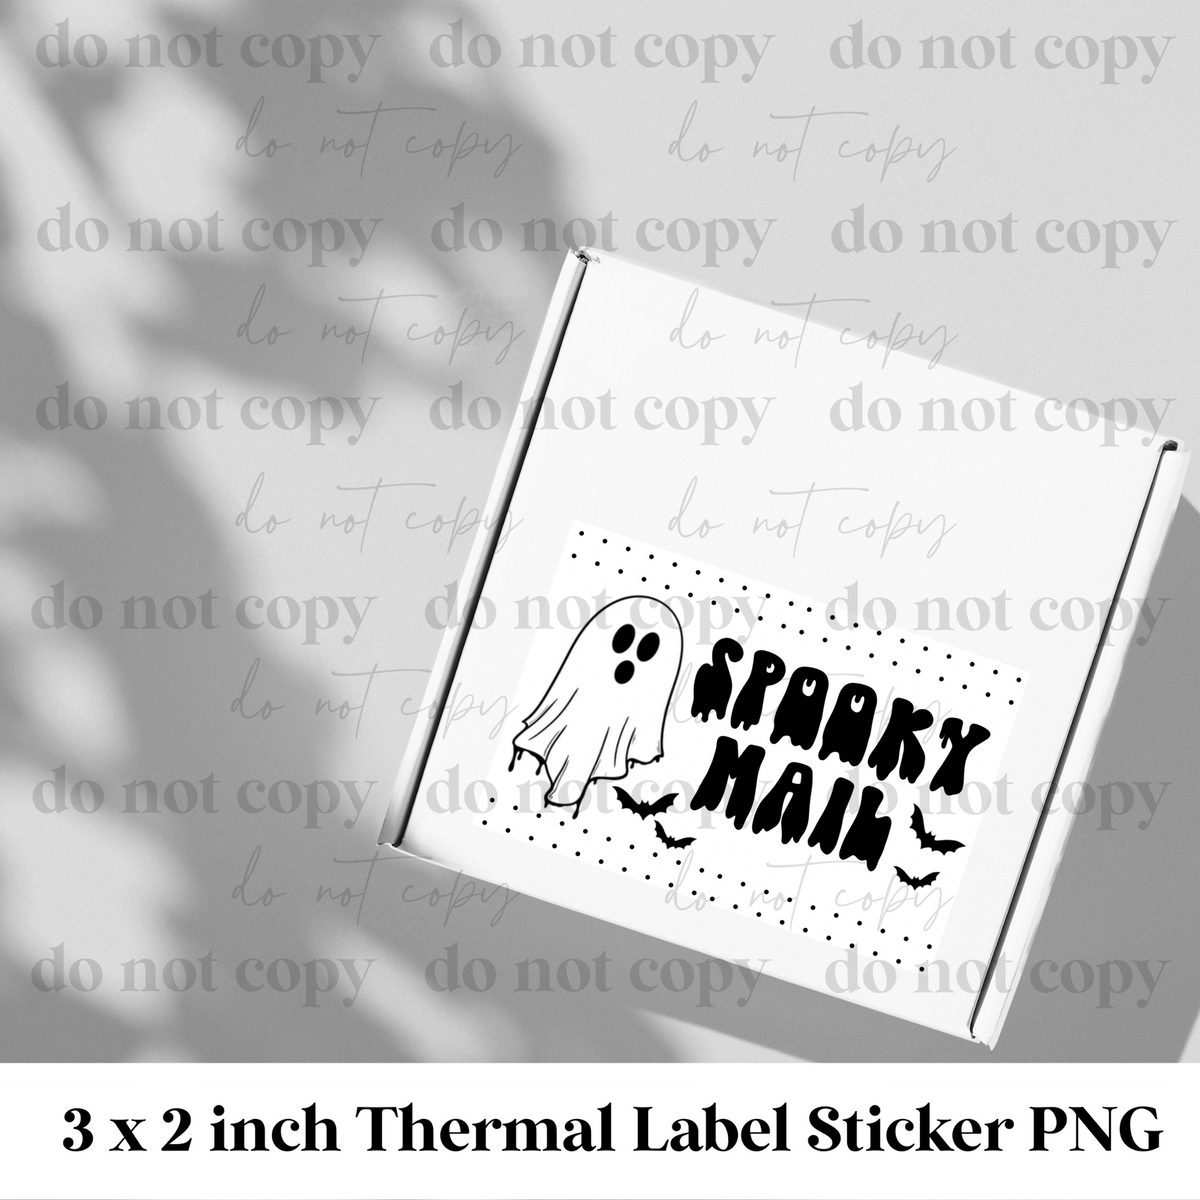 Spooky Mail thermal label sticker png